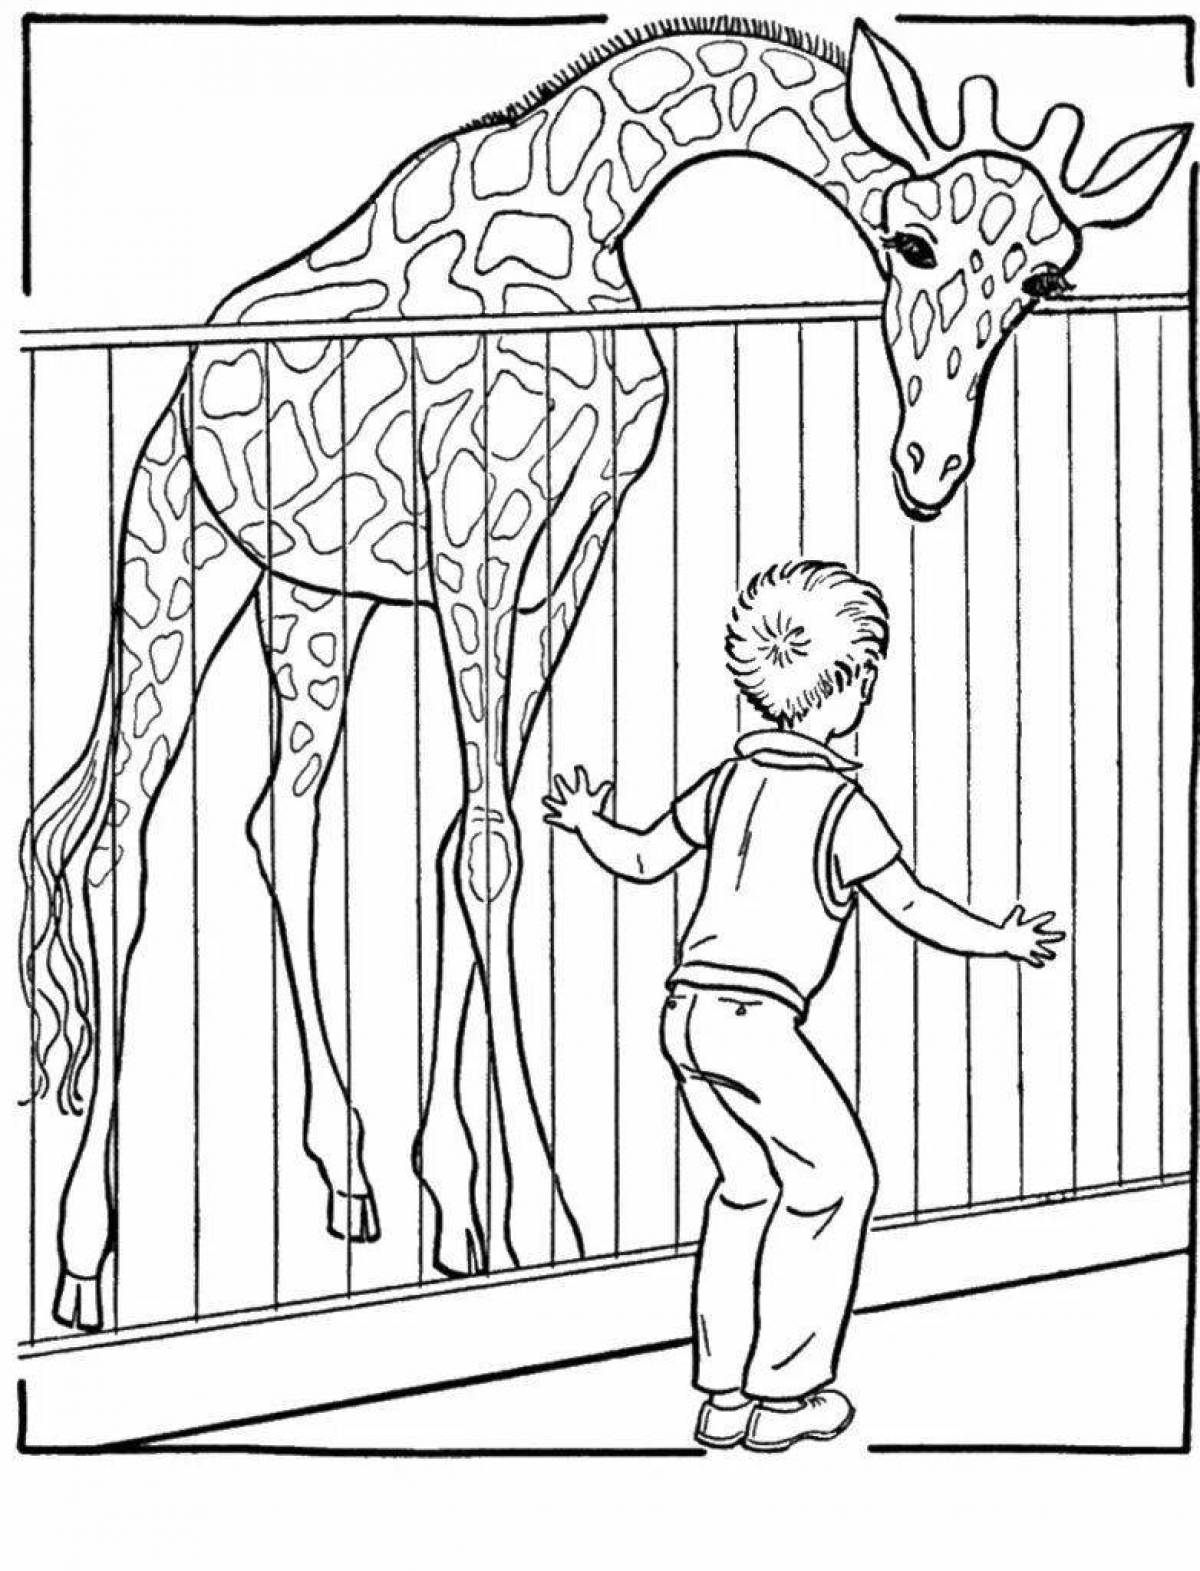 Fantastic zoo coloring pages for kids